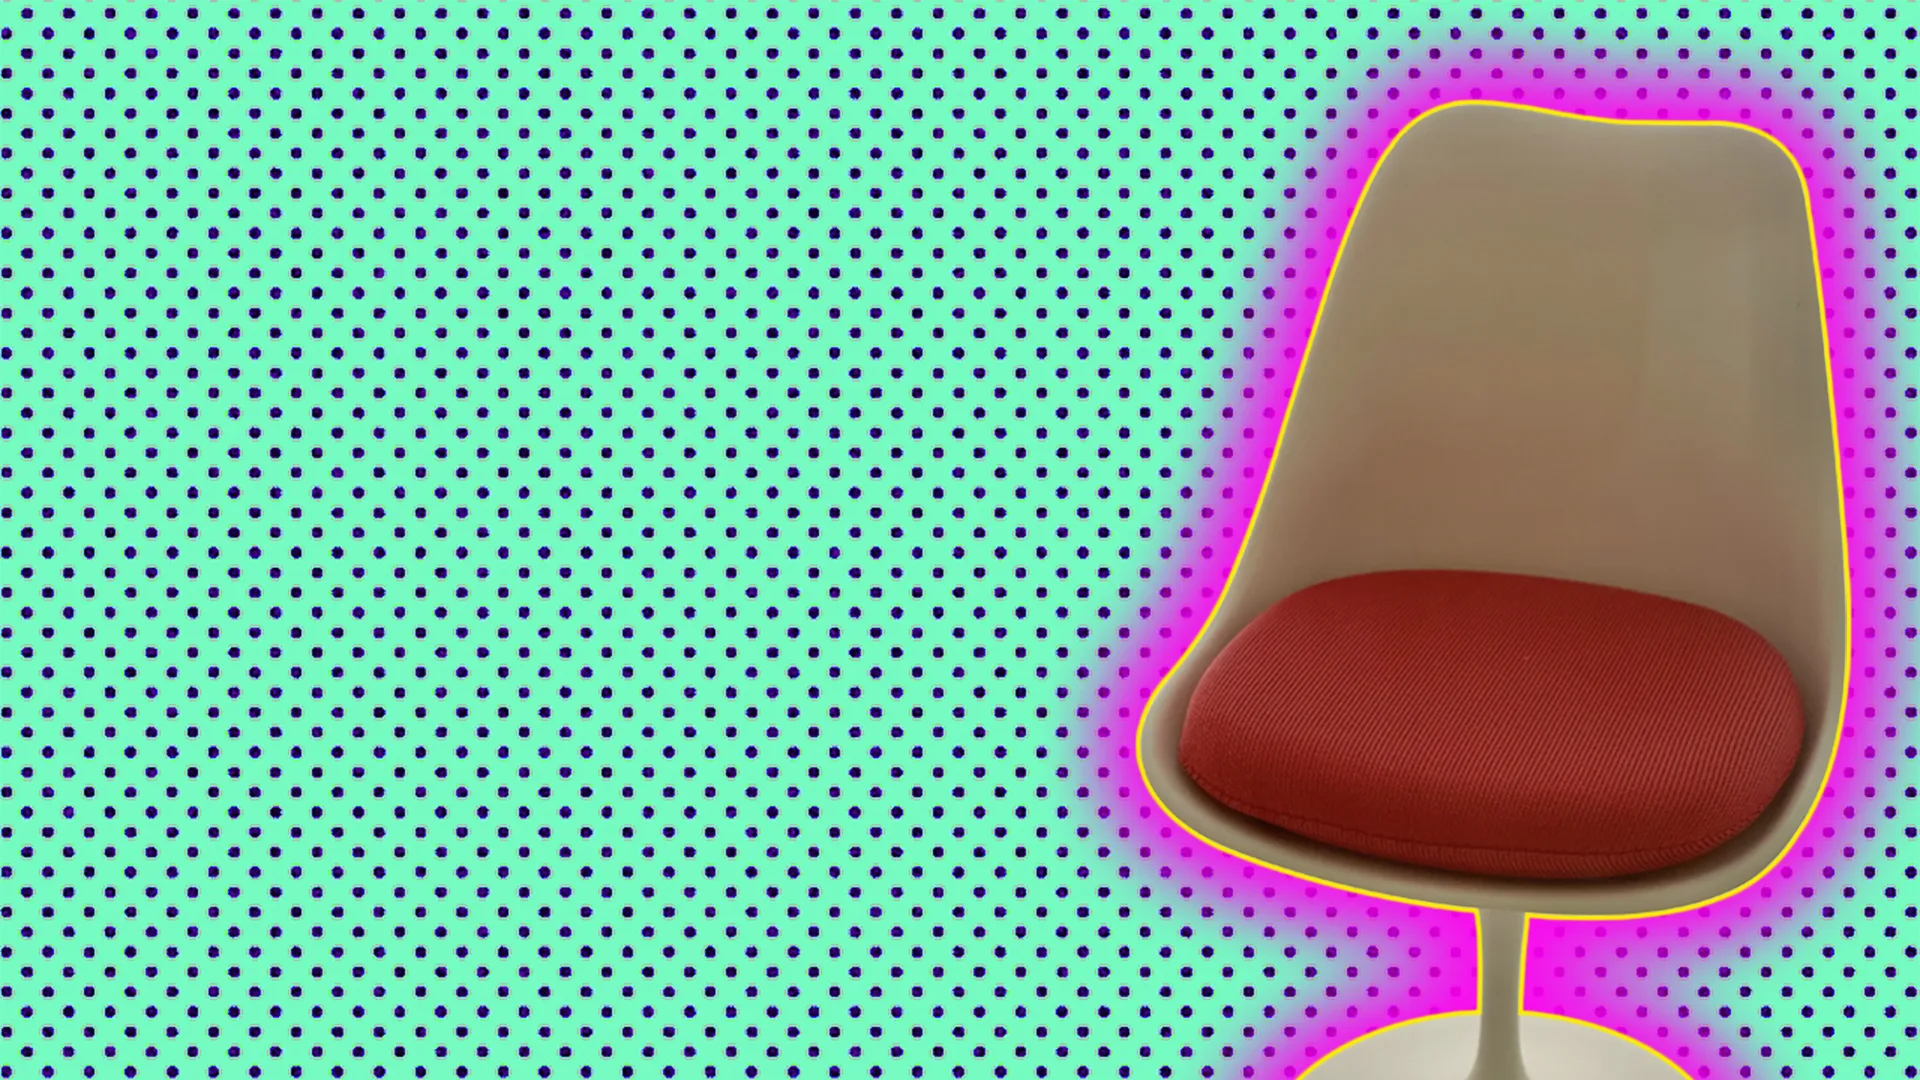 Vintage 60s chair with a polkadot background and a glow around the image